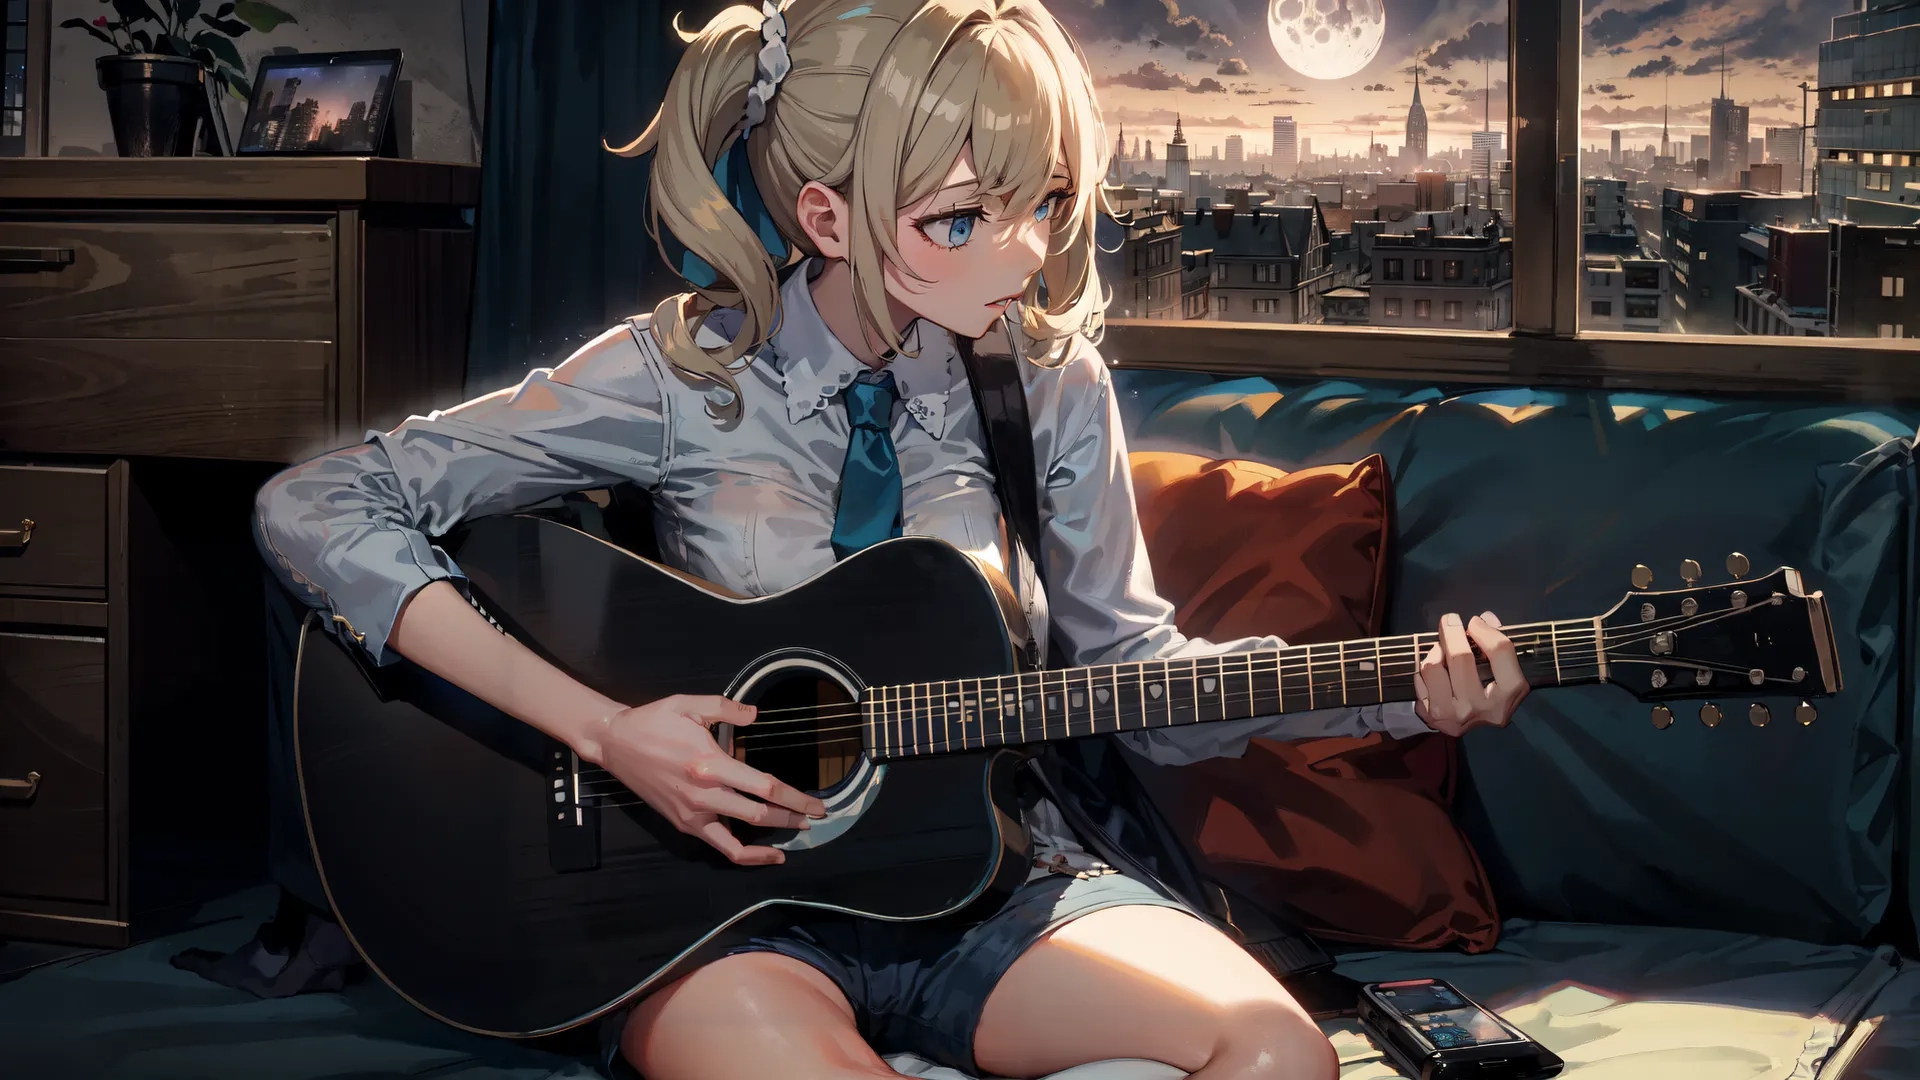 a young female playing guitar and wearing all black in an asian style setting with a city backdrop above her headband and a bright moon in the distance
